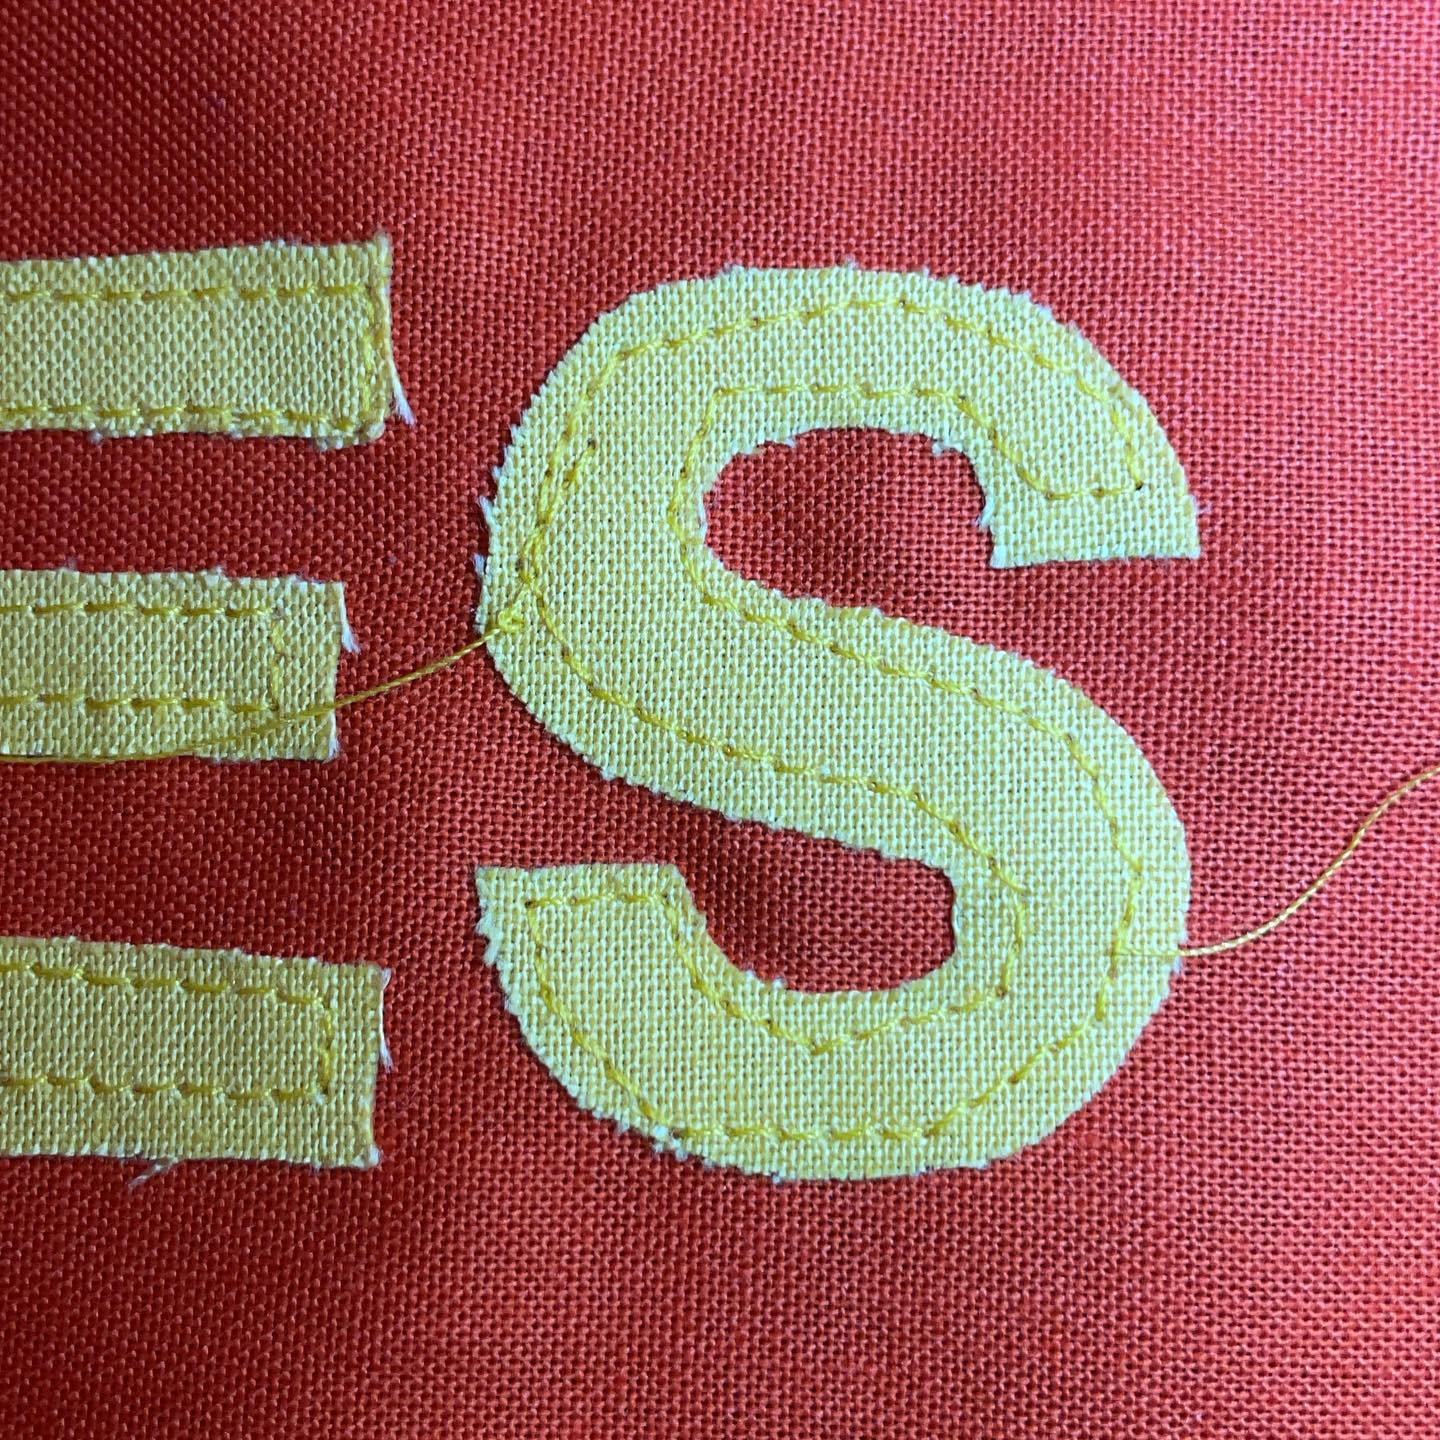 I really dislike the letter S when it comes to appliqué…